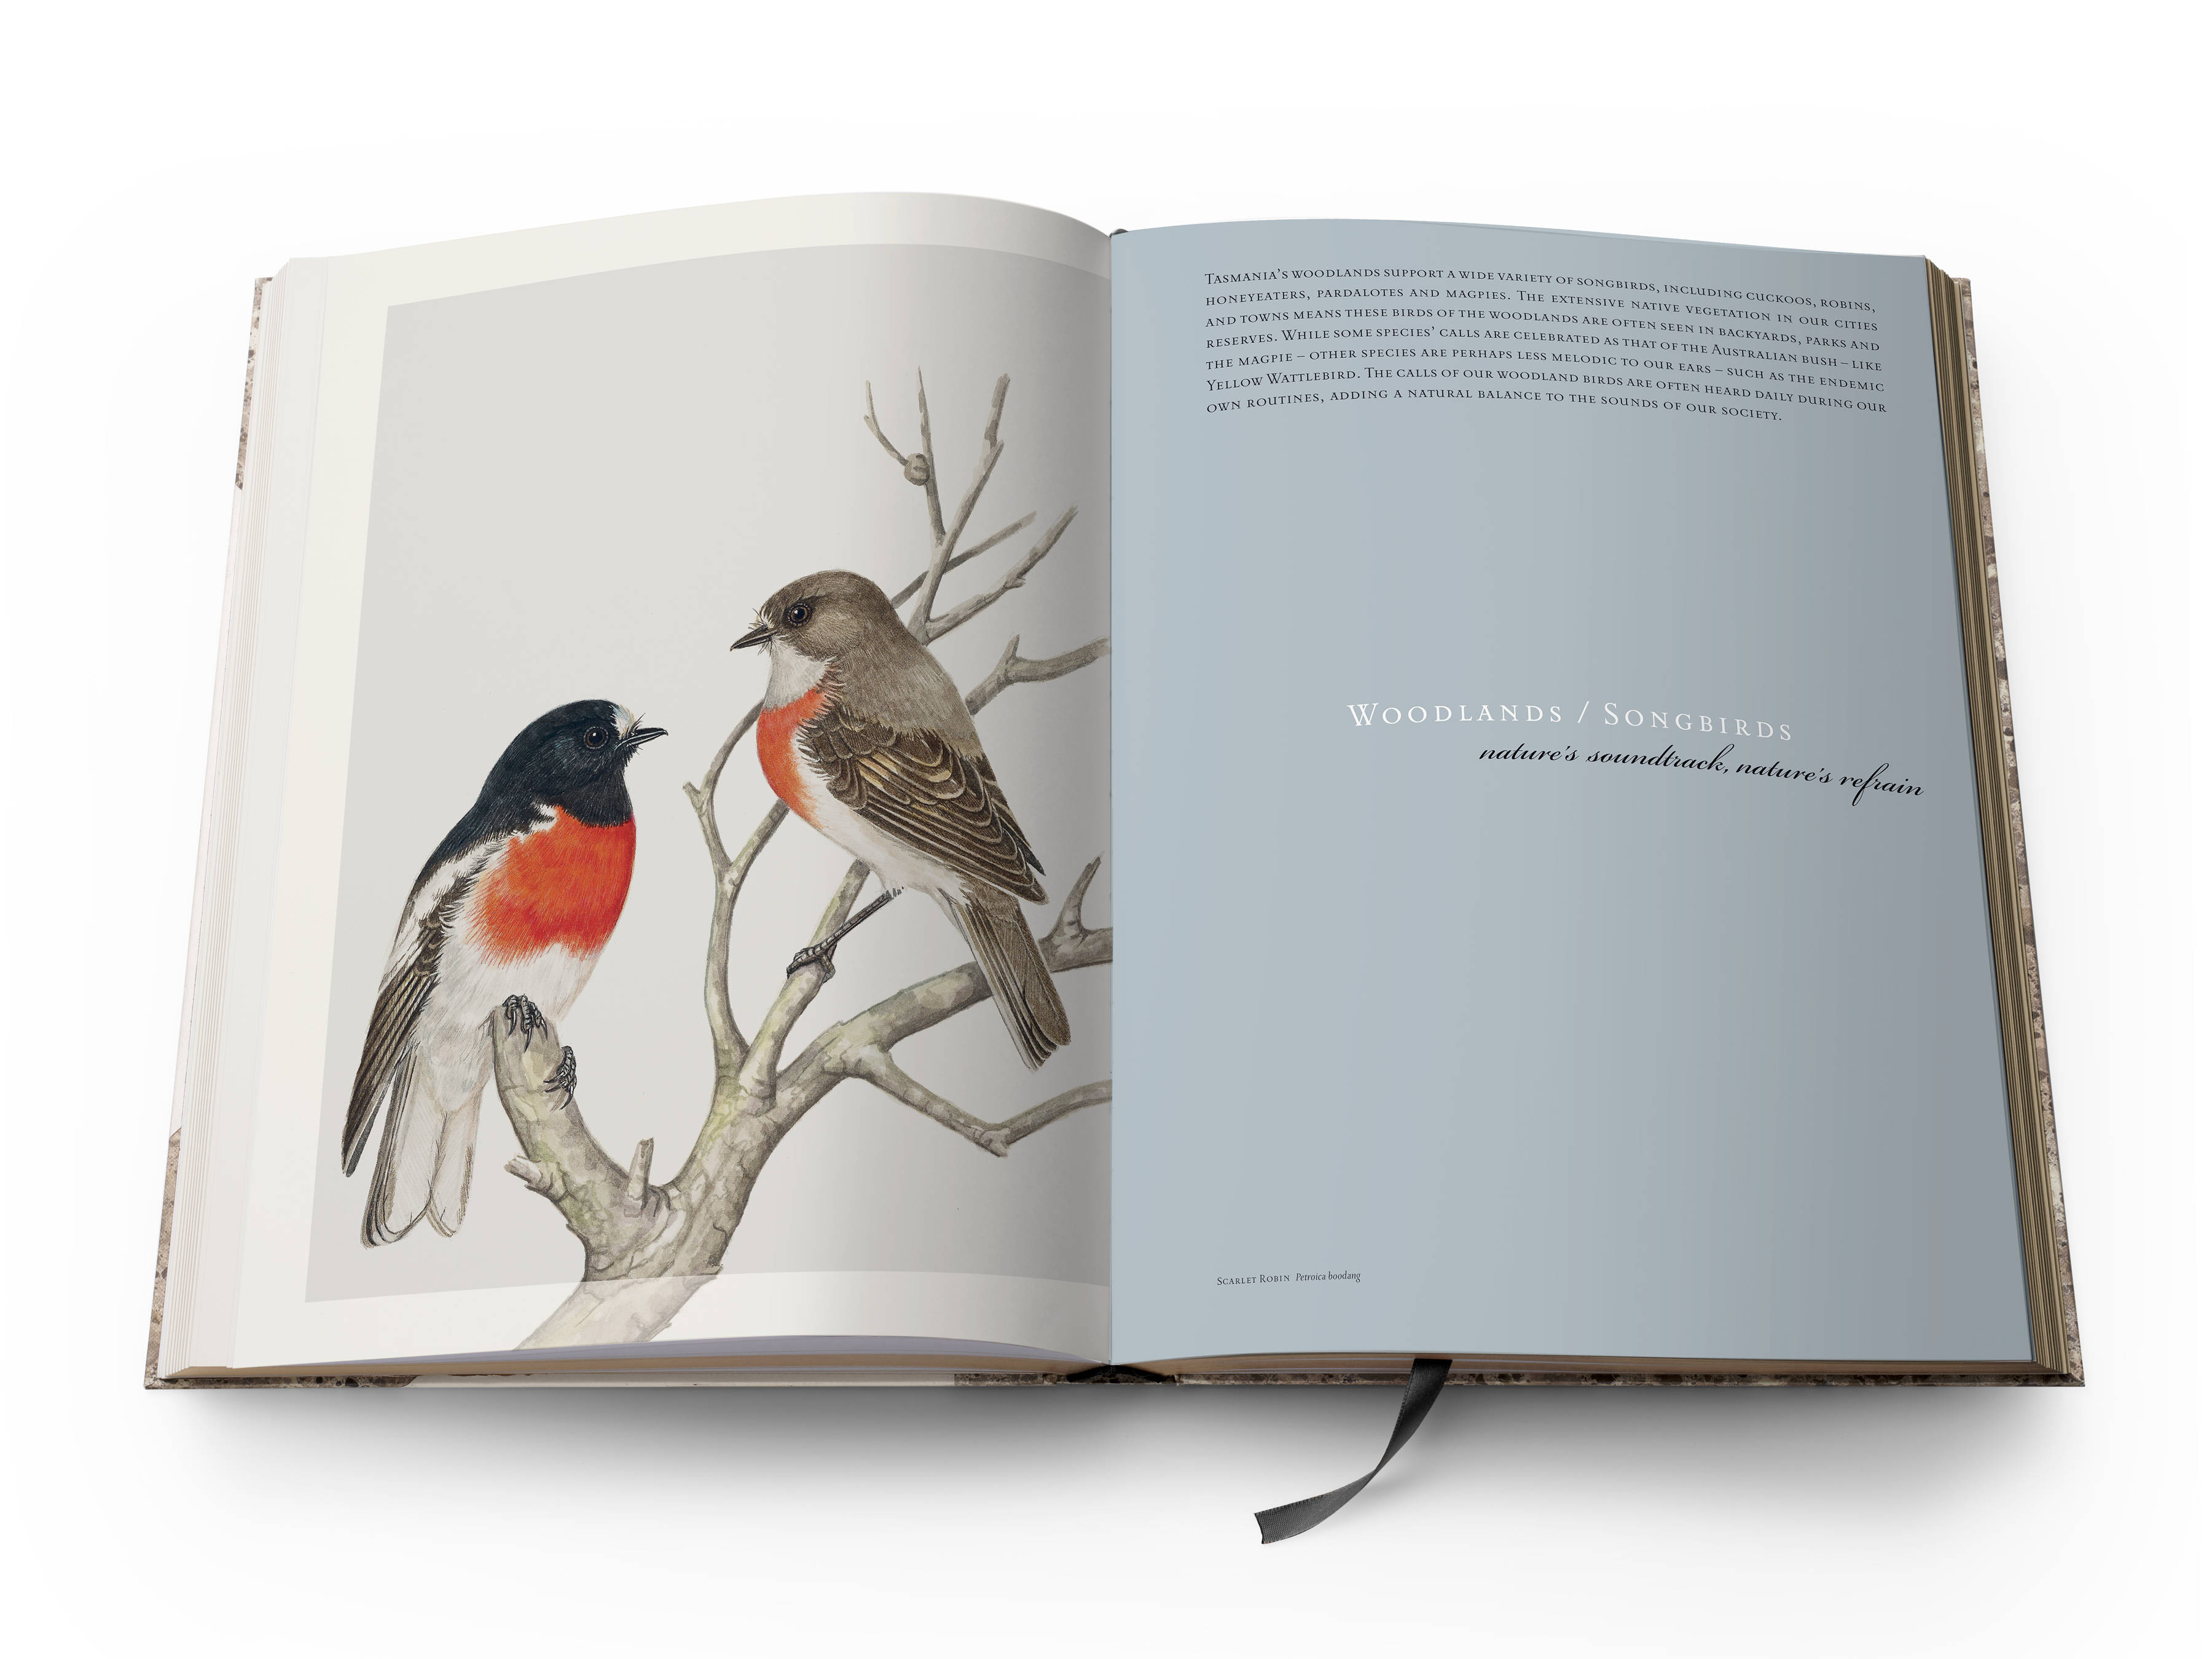 A double page spread from the book with a full-page colour plate of a Scarlet Robin ‘Petroica boodang’ on the left and the title of the section Woodlands / Songbirds, ‘Nature’s soundtrack, nature’s refrain’ on the right.